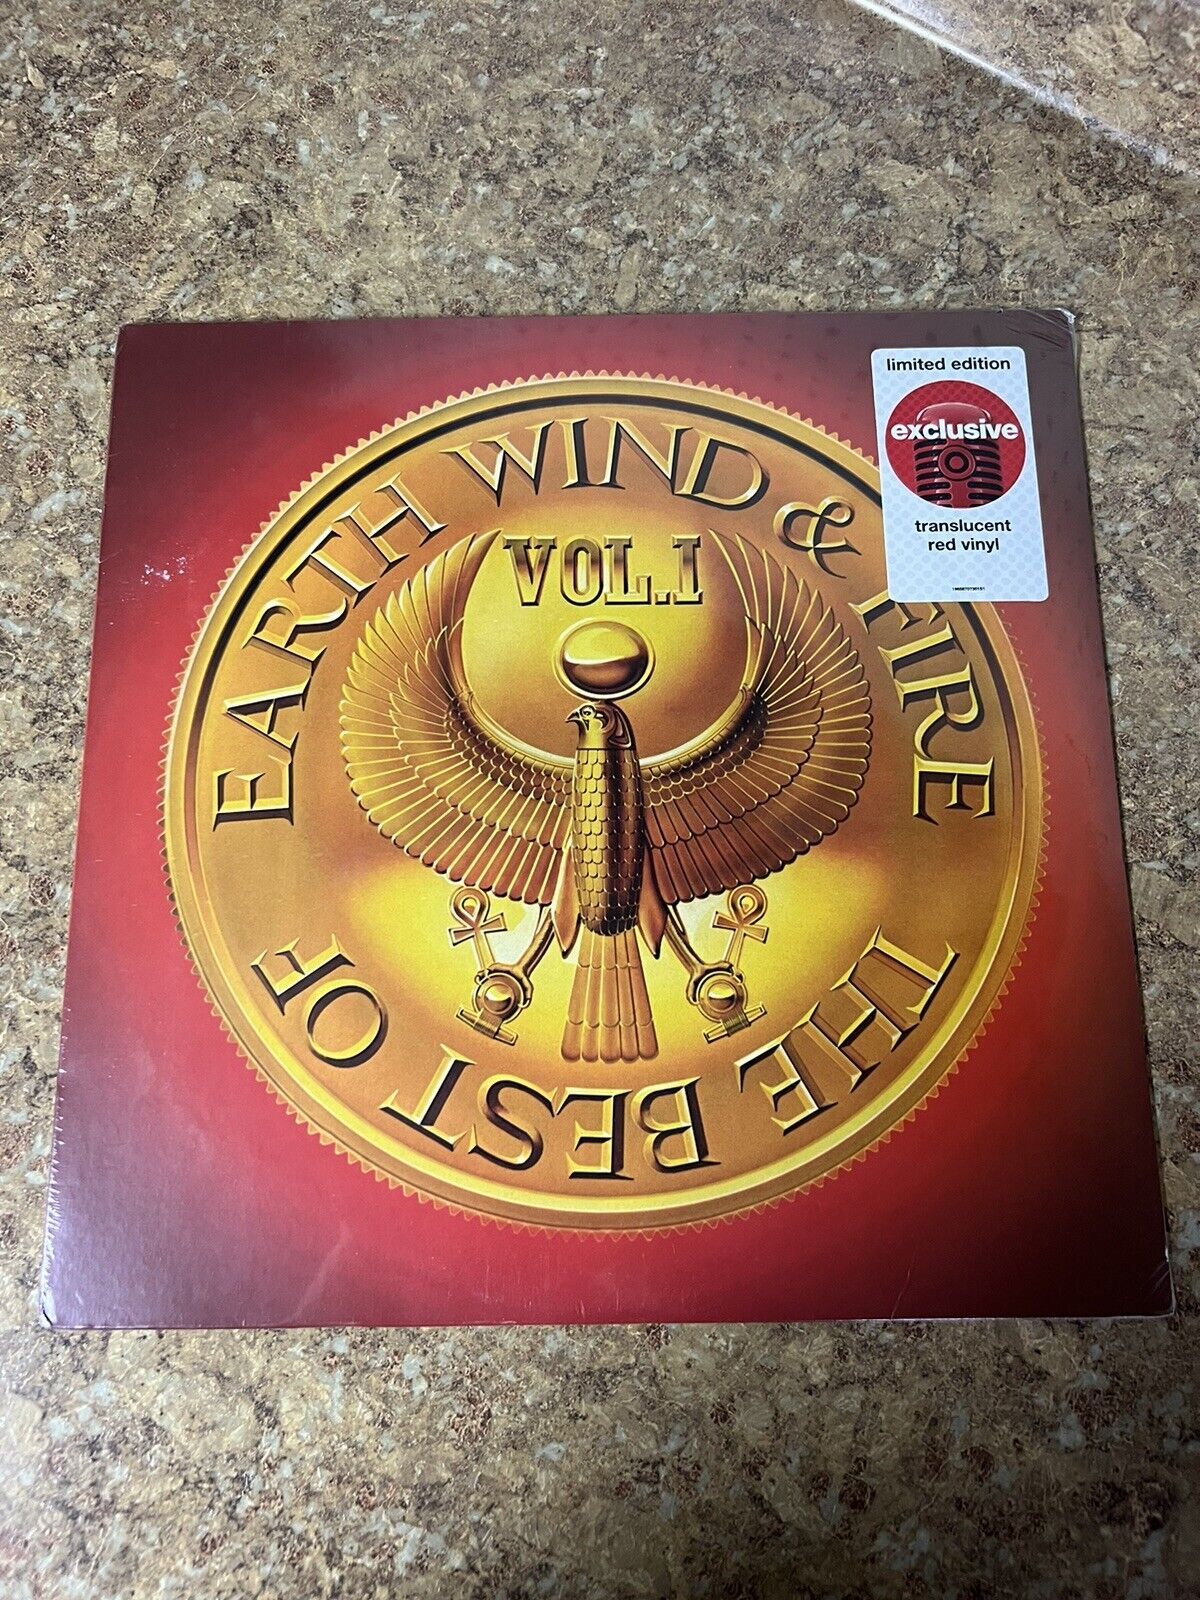 Earth Wind & Fire - Best of Vol. 1 - Red Vinyl LP Record Target Exclusive